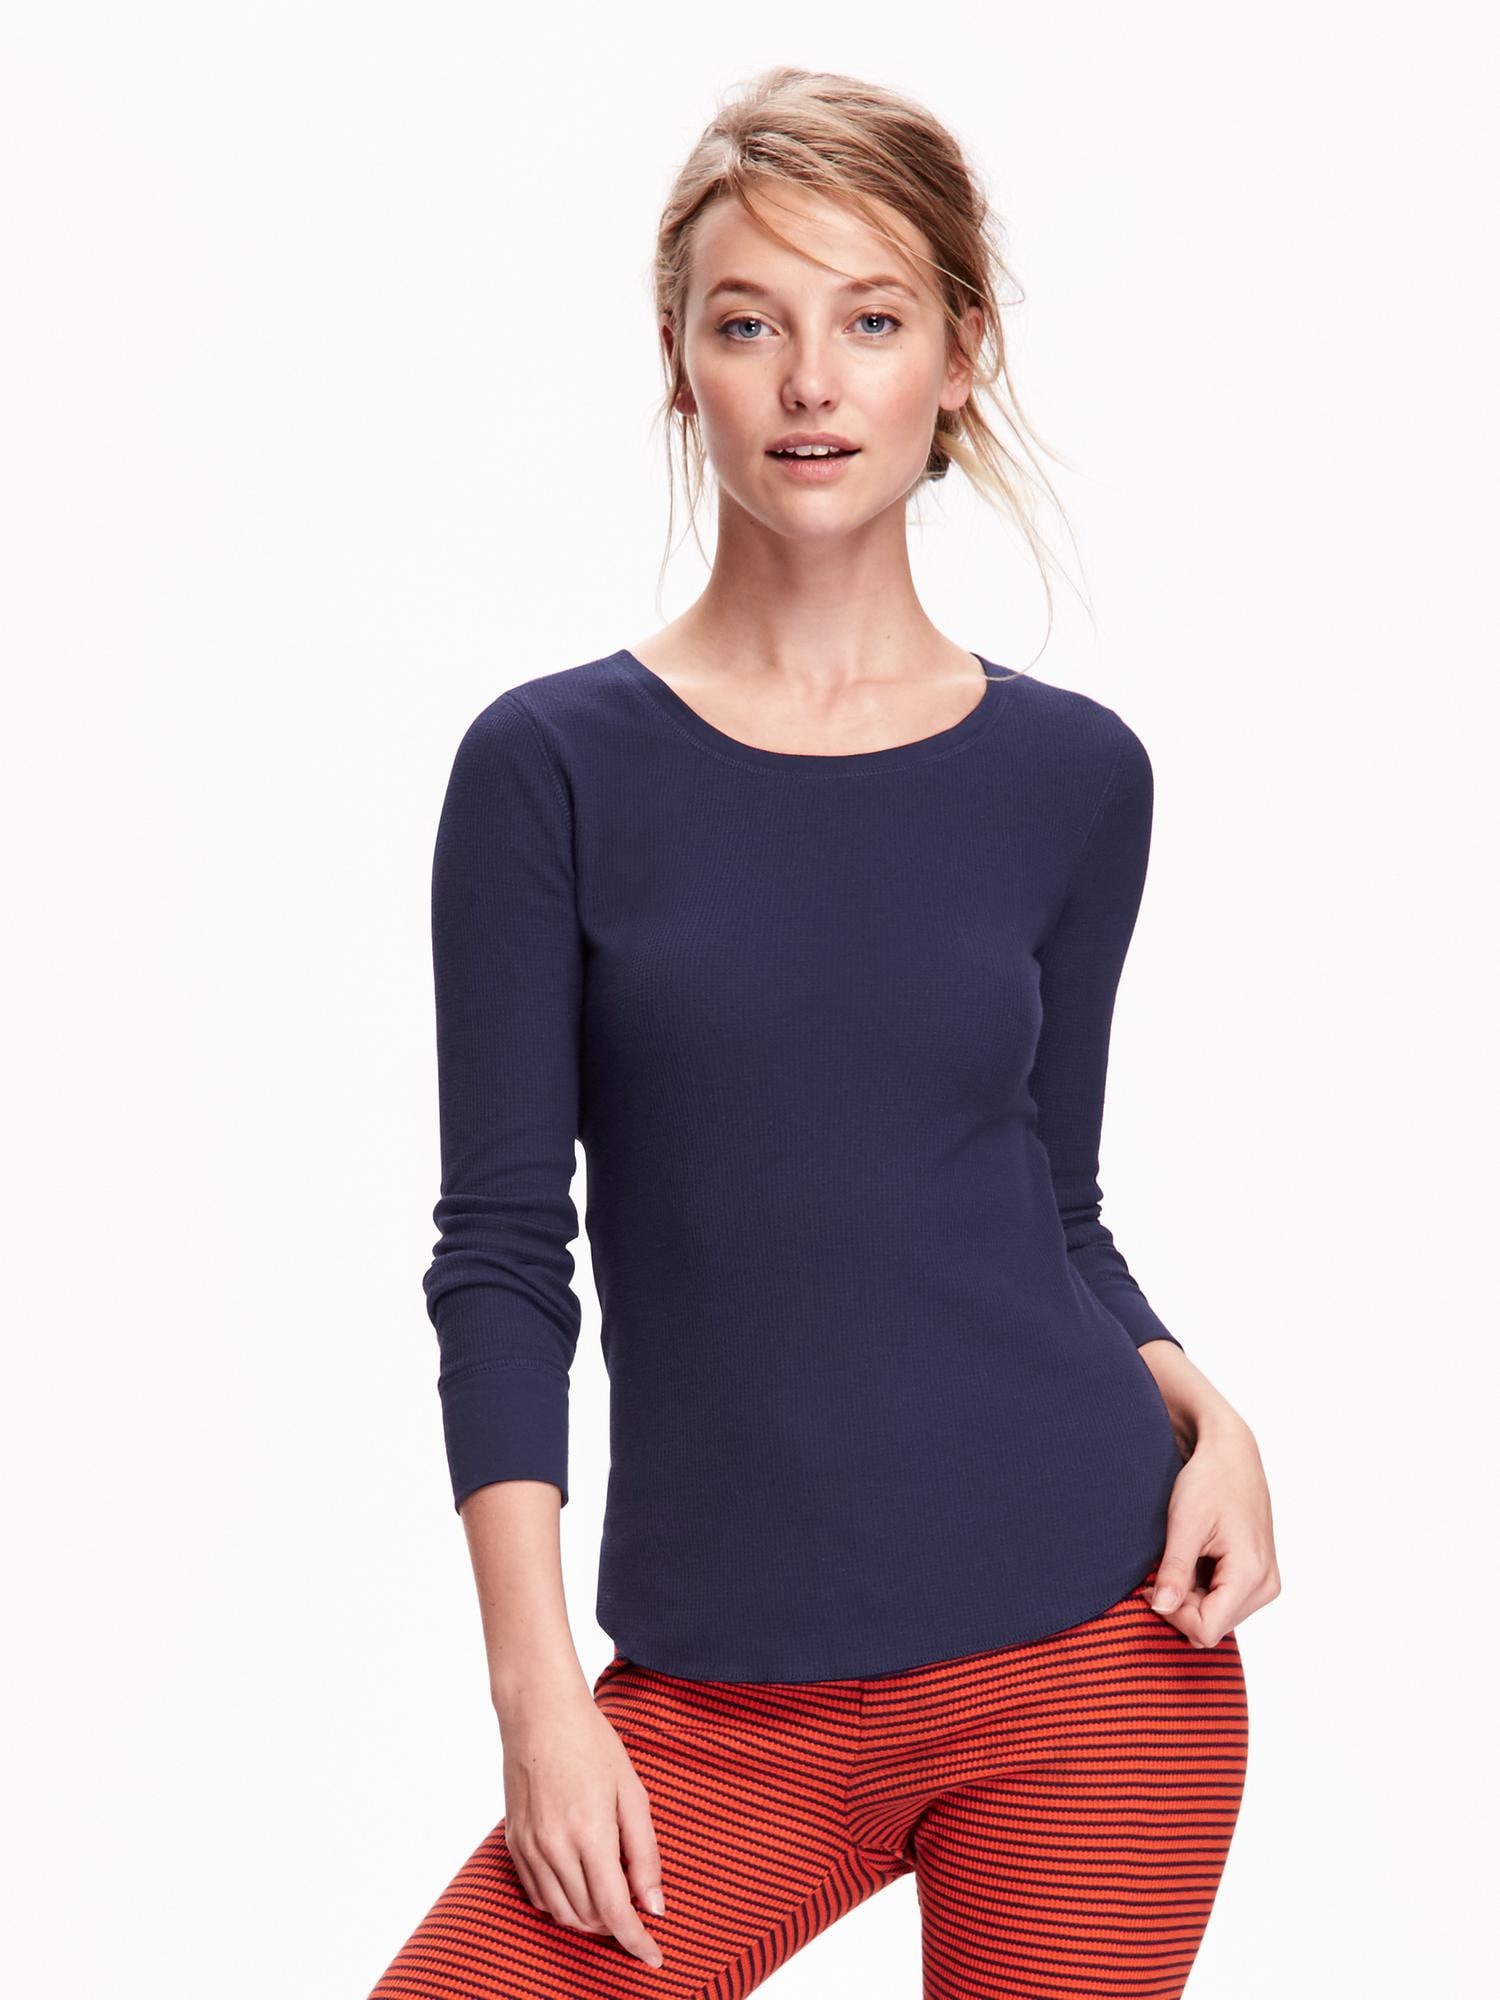 Indefinite Hiring Reverberation Thermal Crew-Neck Tee for Women | Old Navy